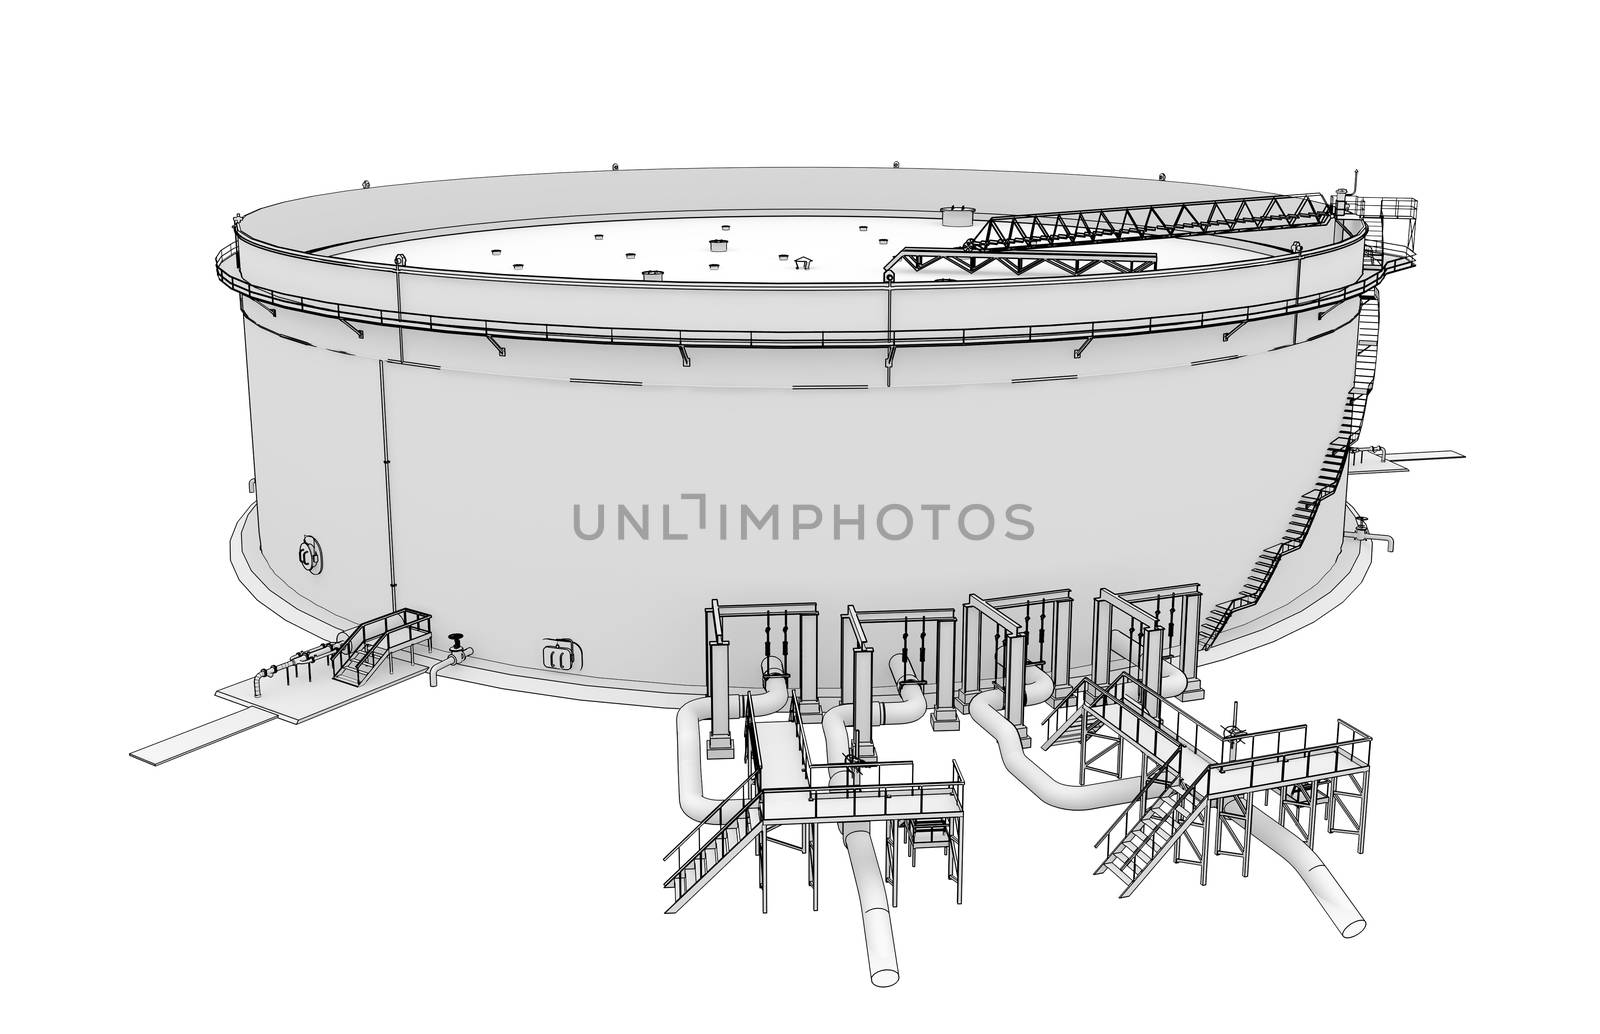 Oil tank rendering in lines by cherezoff